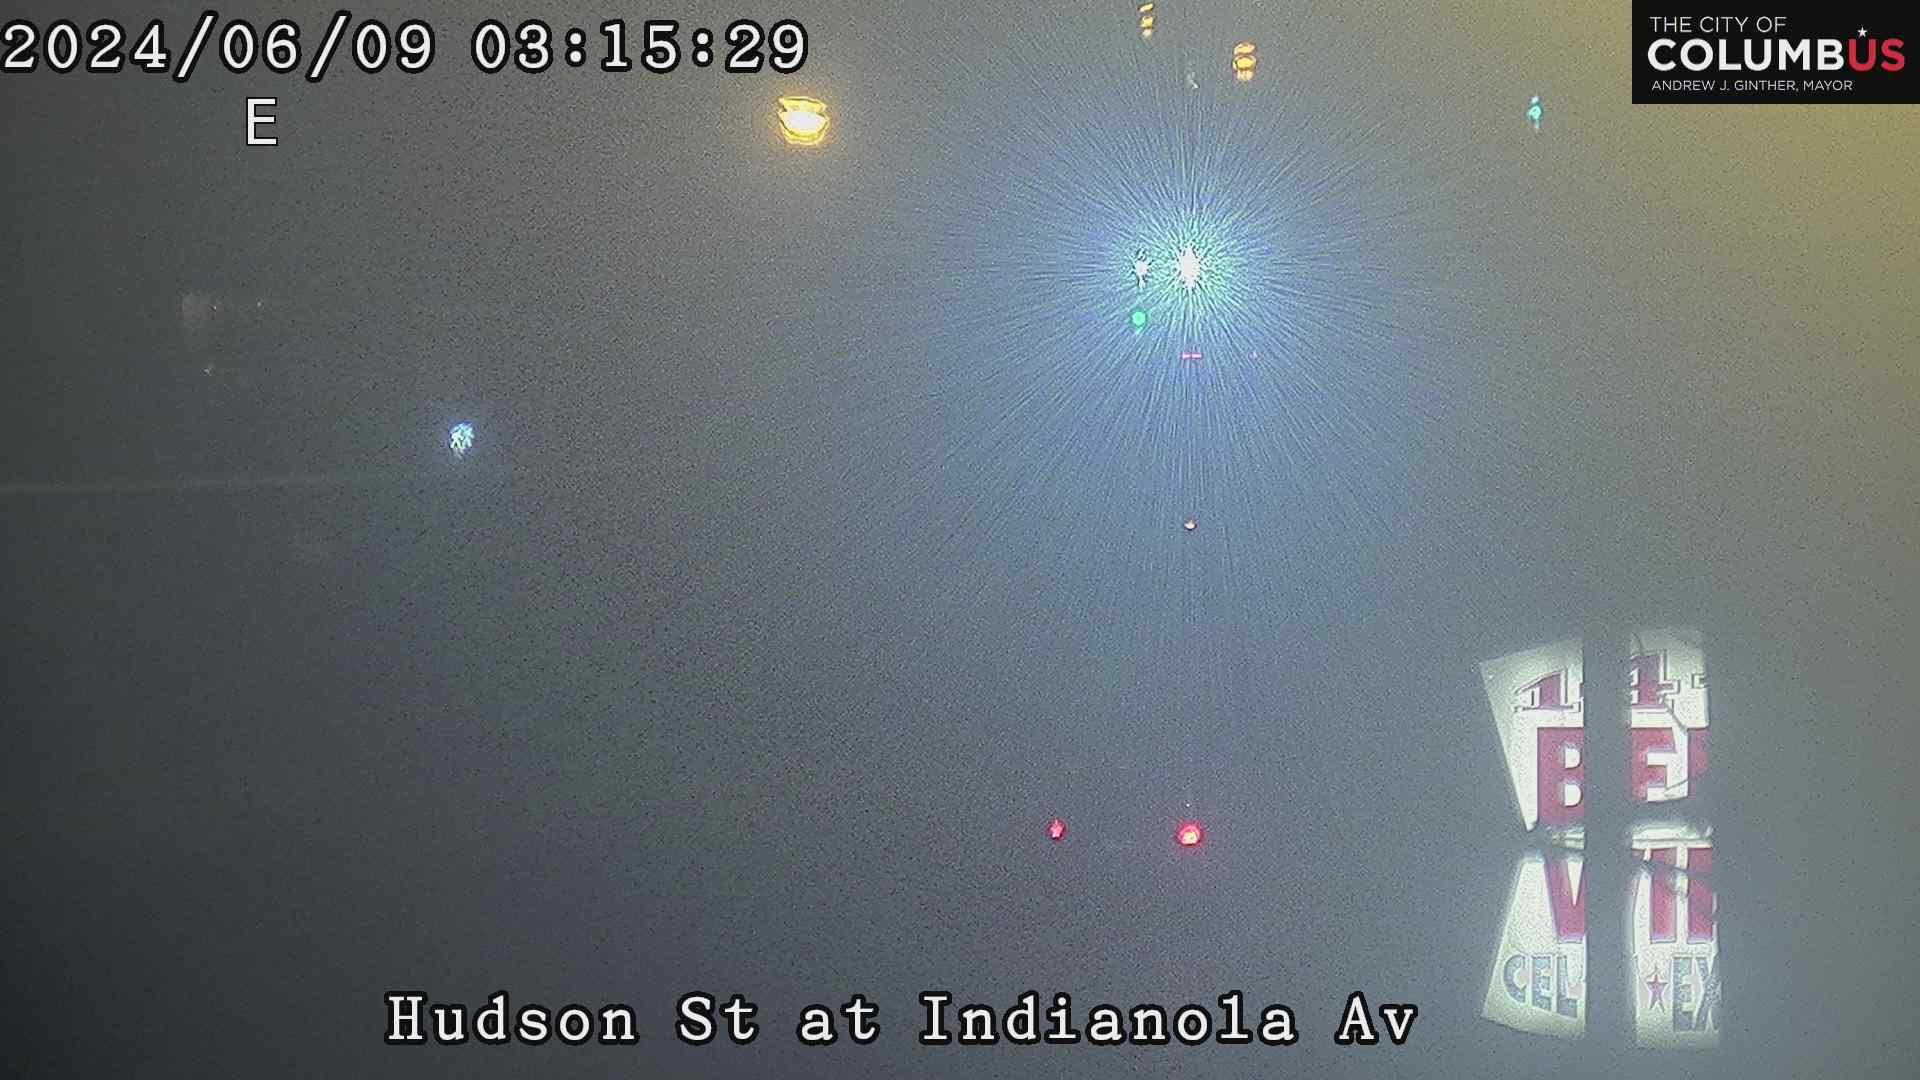 Traffic Cam Old North Columbus: City of Columbus) Hudson St at Indianola Ave